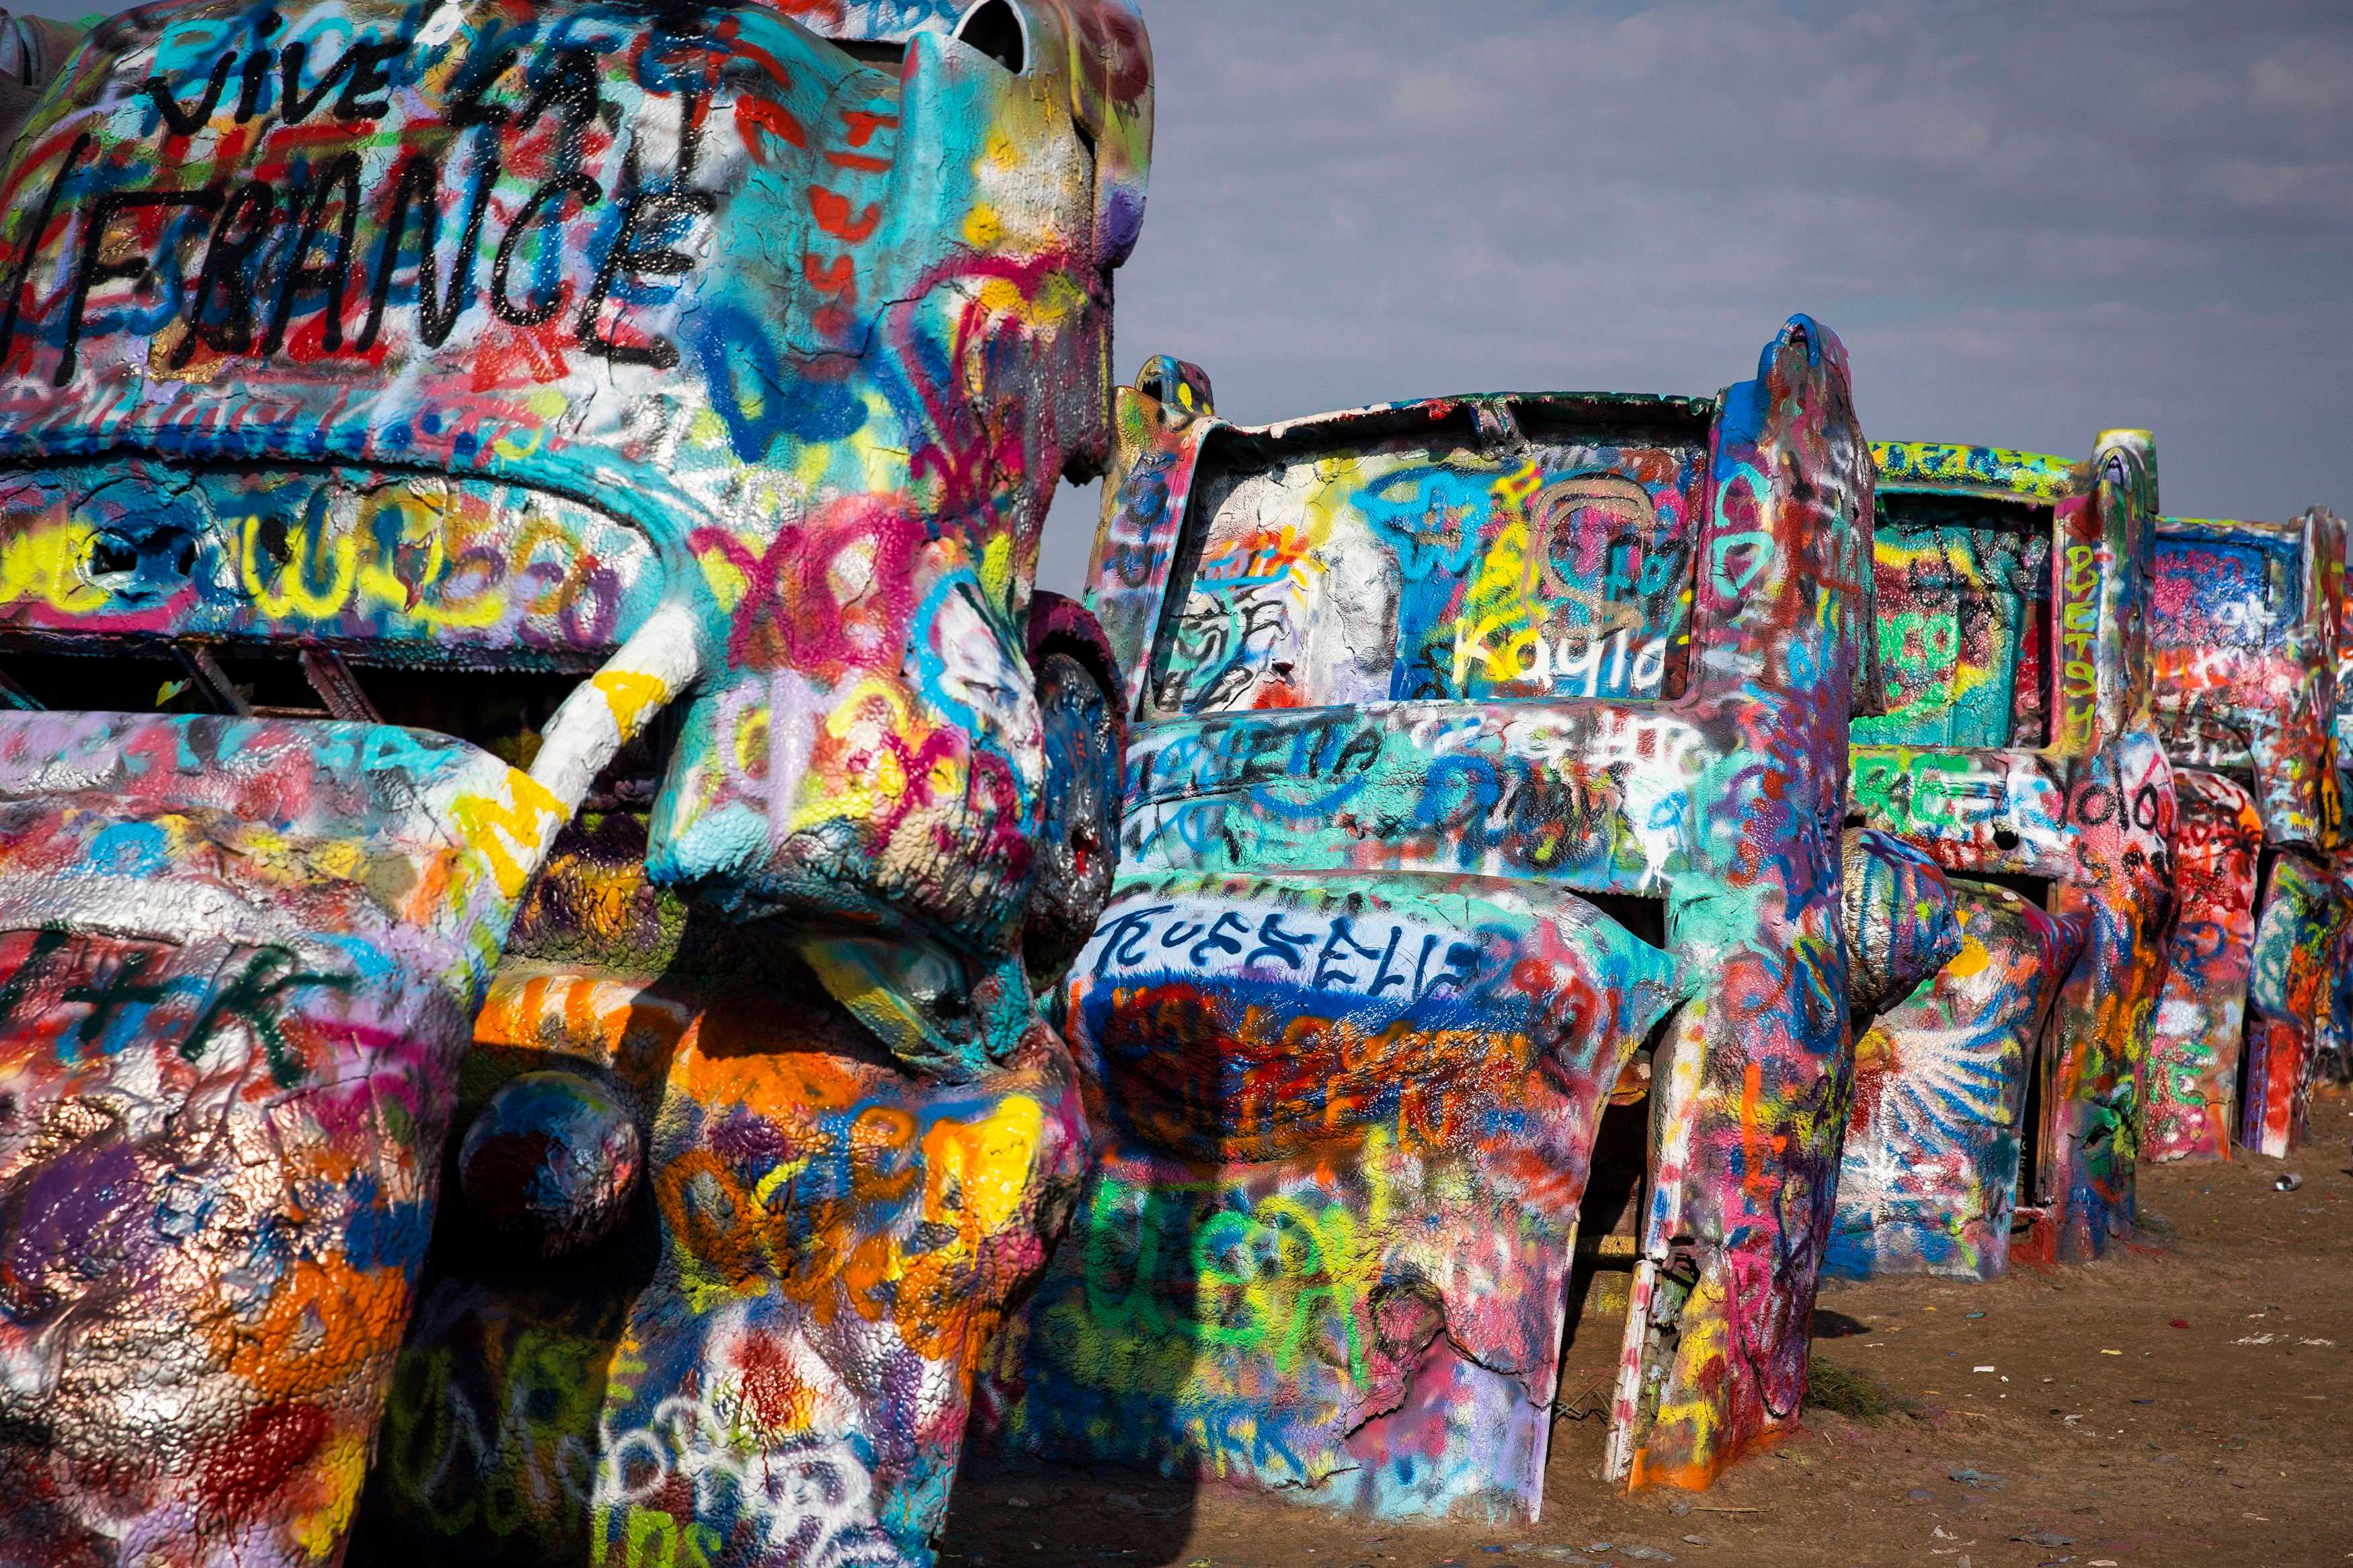 In Amarillo, Texas, Cadillac Ranch has captivated tourists since it was built in 1974.